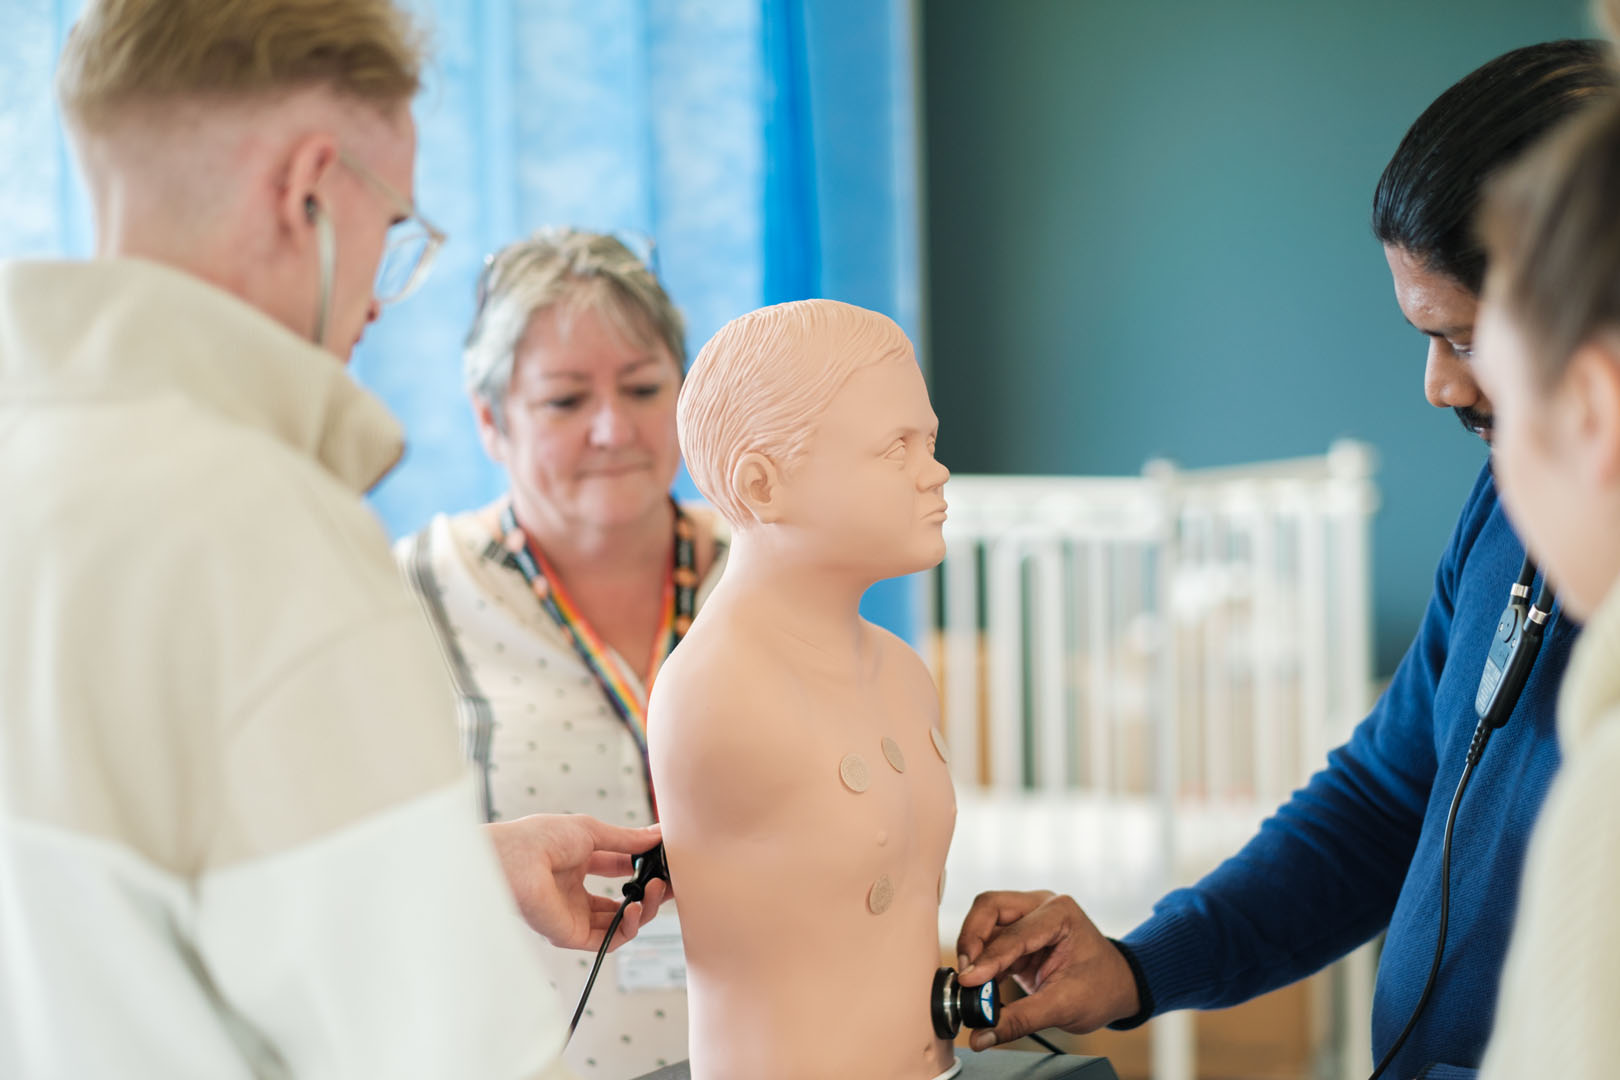 Students being assessed inspecting a medical dummy